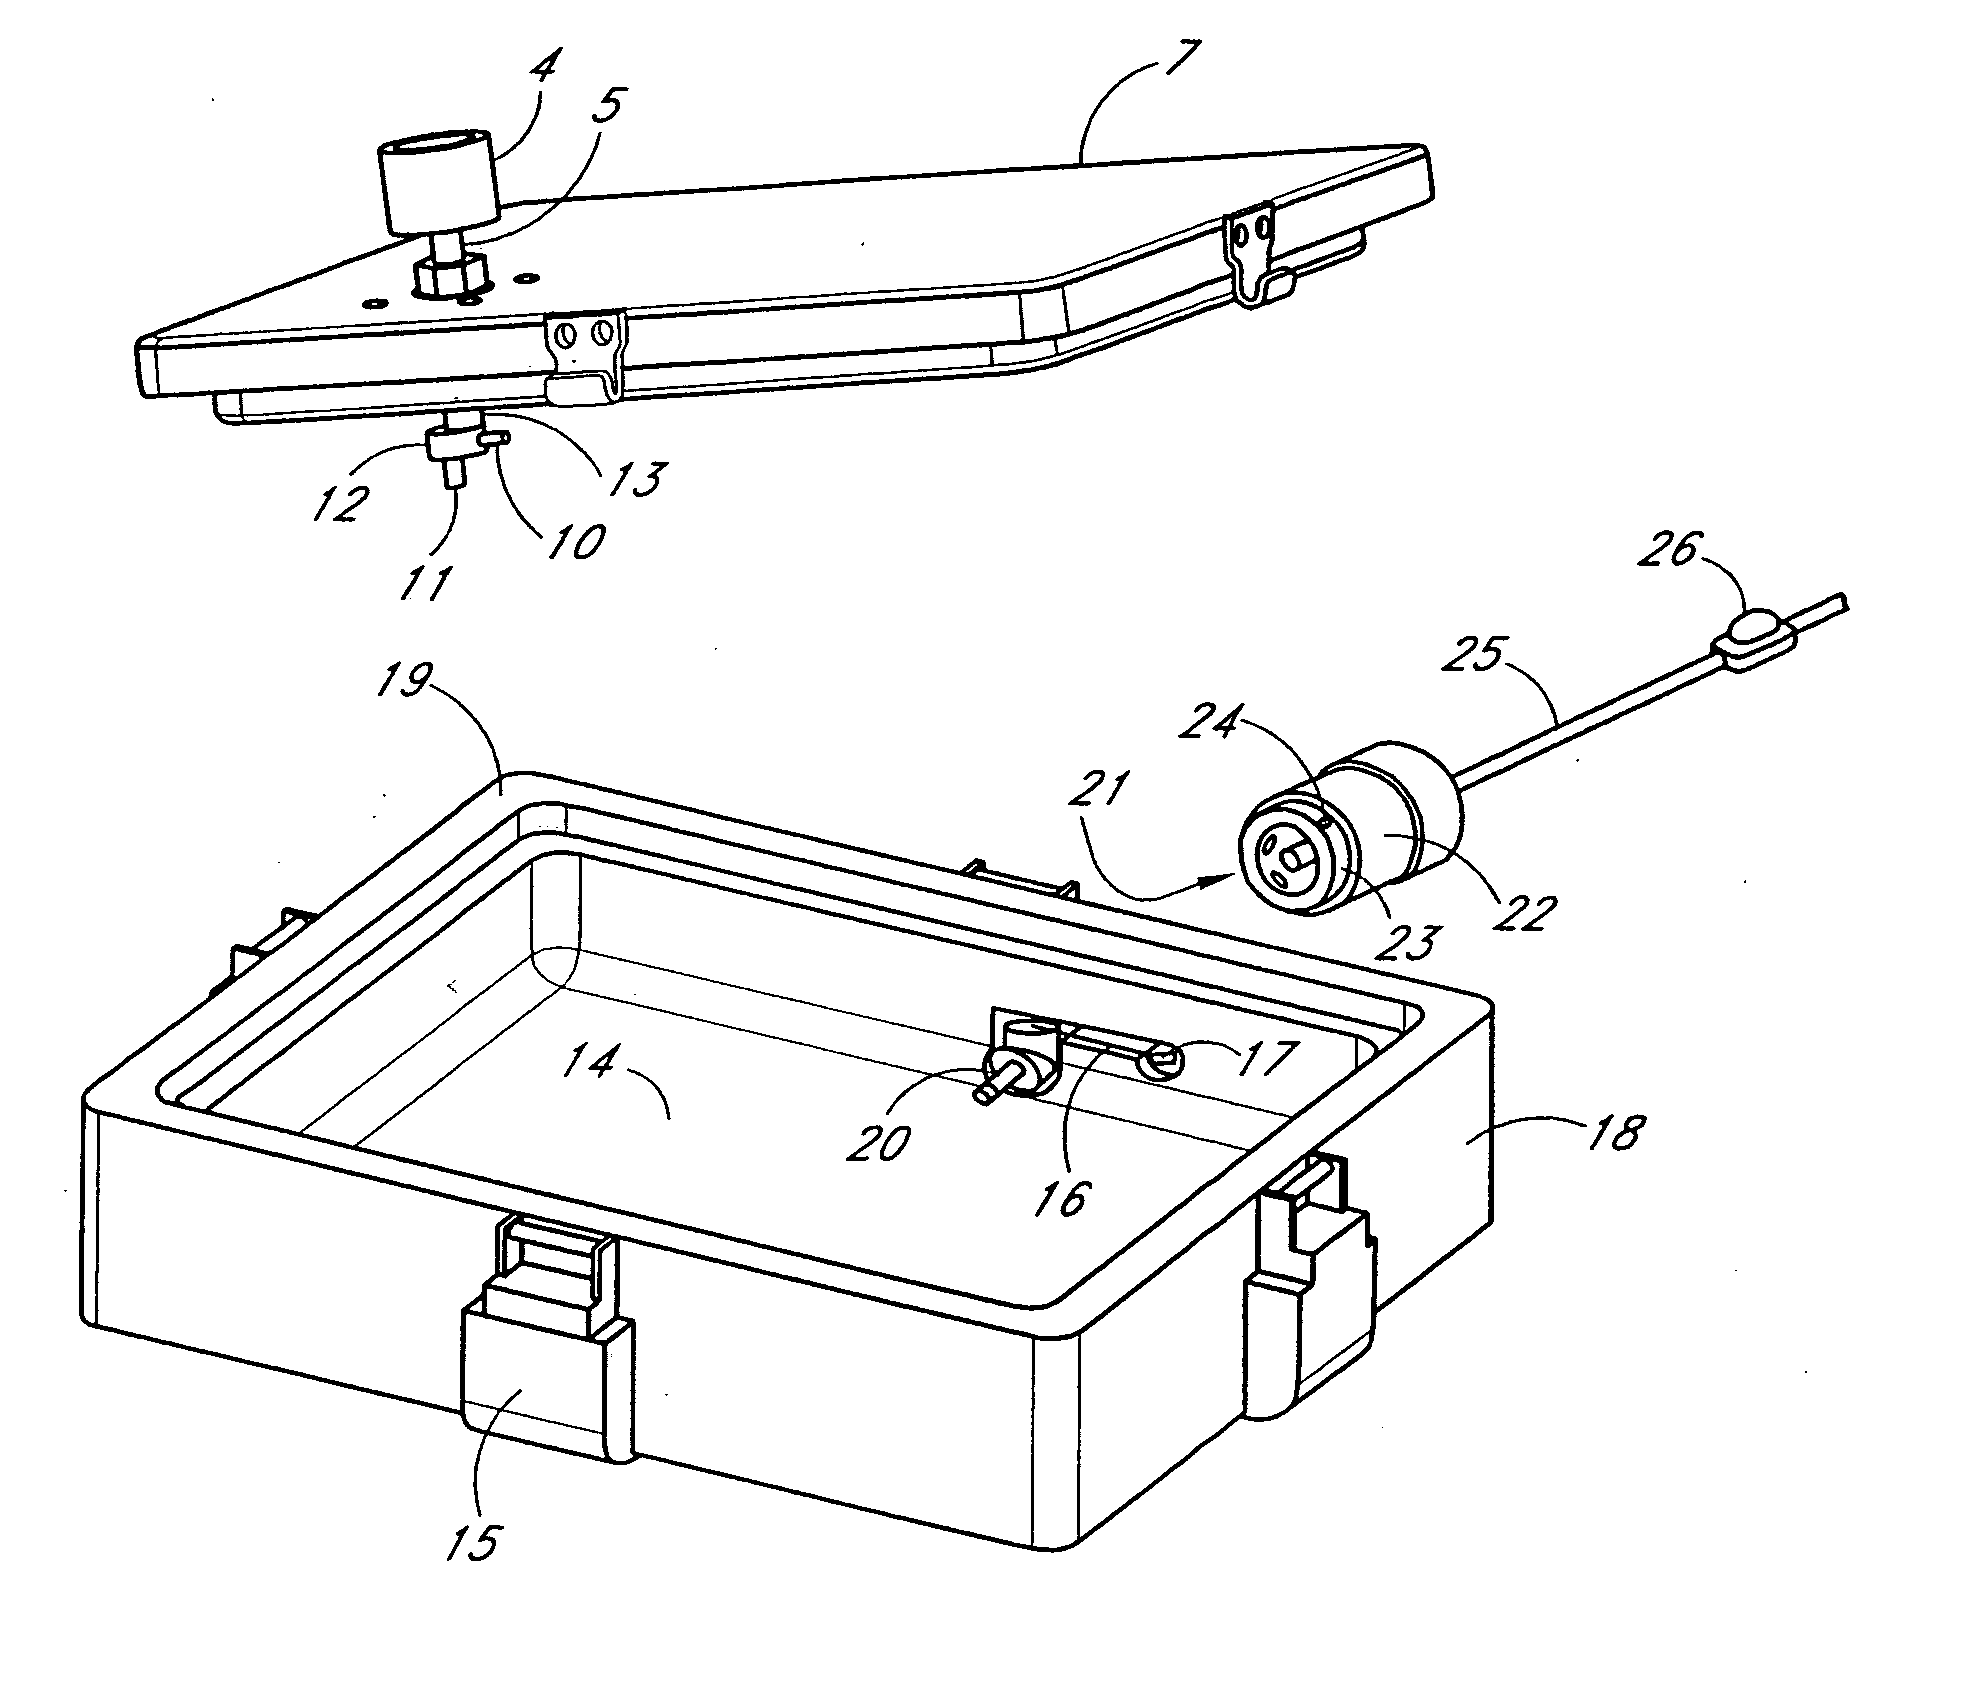 Protective housing for an audio device